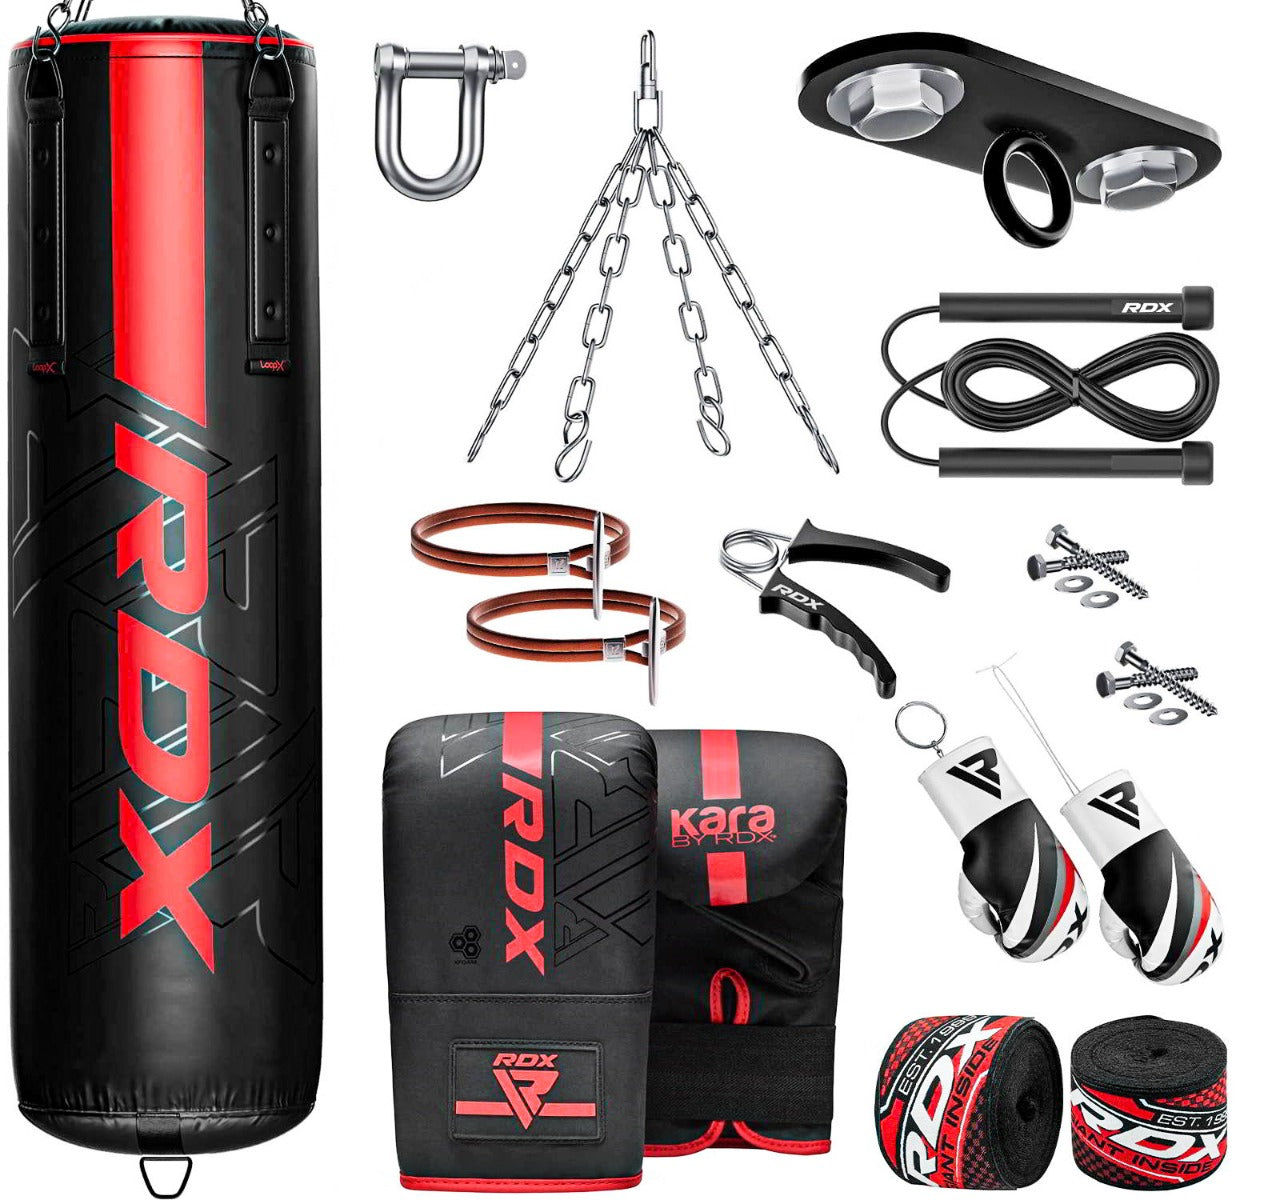 RDX F6 KARA 13pcs 4ft / 5ft Set Heavy Boxing Punch Bag & Mitts Home Gym Kit-4 ft-Red-Unfilled